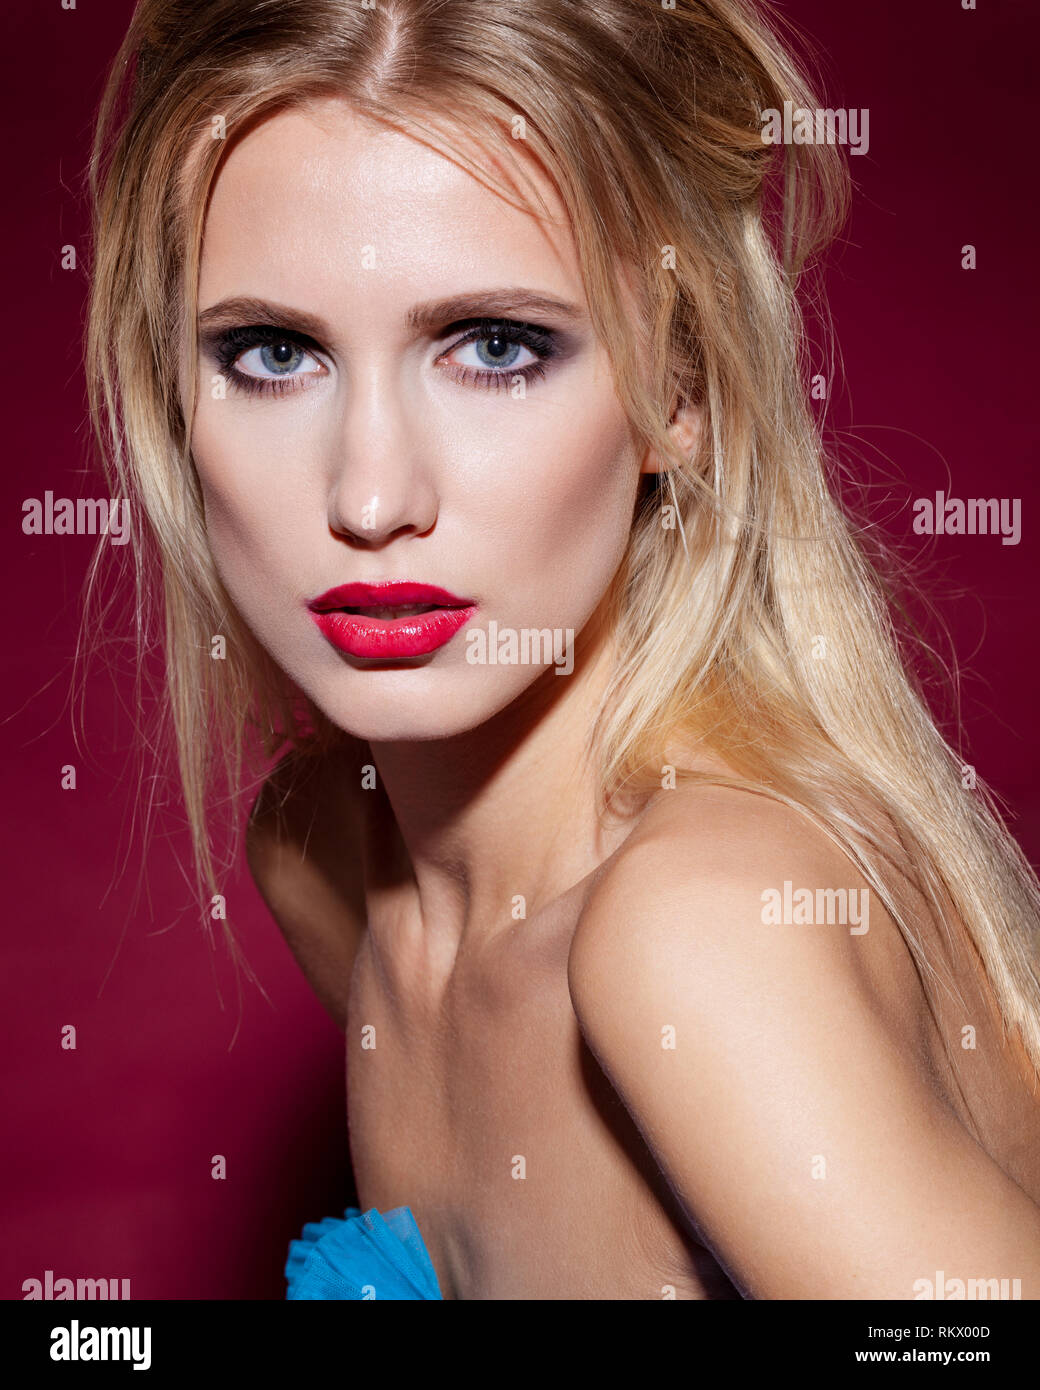 Fashion portrait of a young woman posing Stock Photo